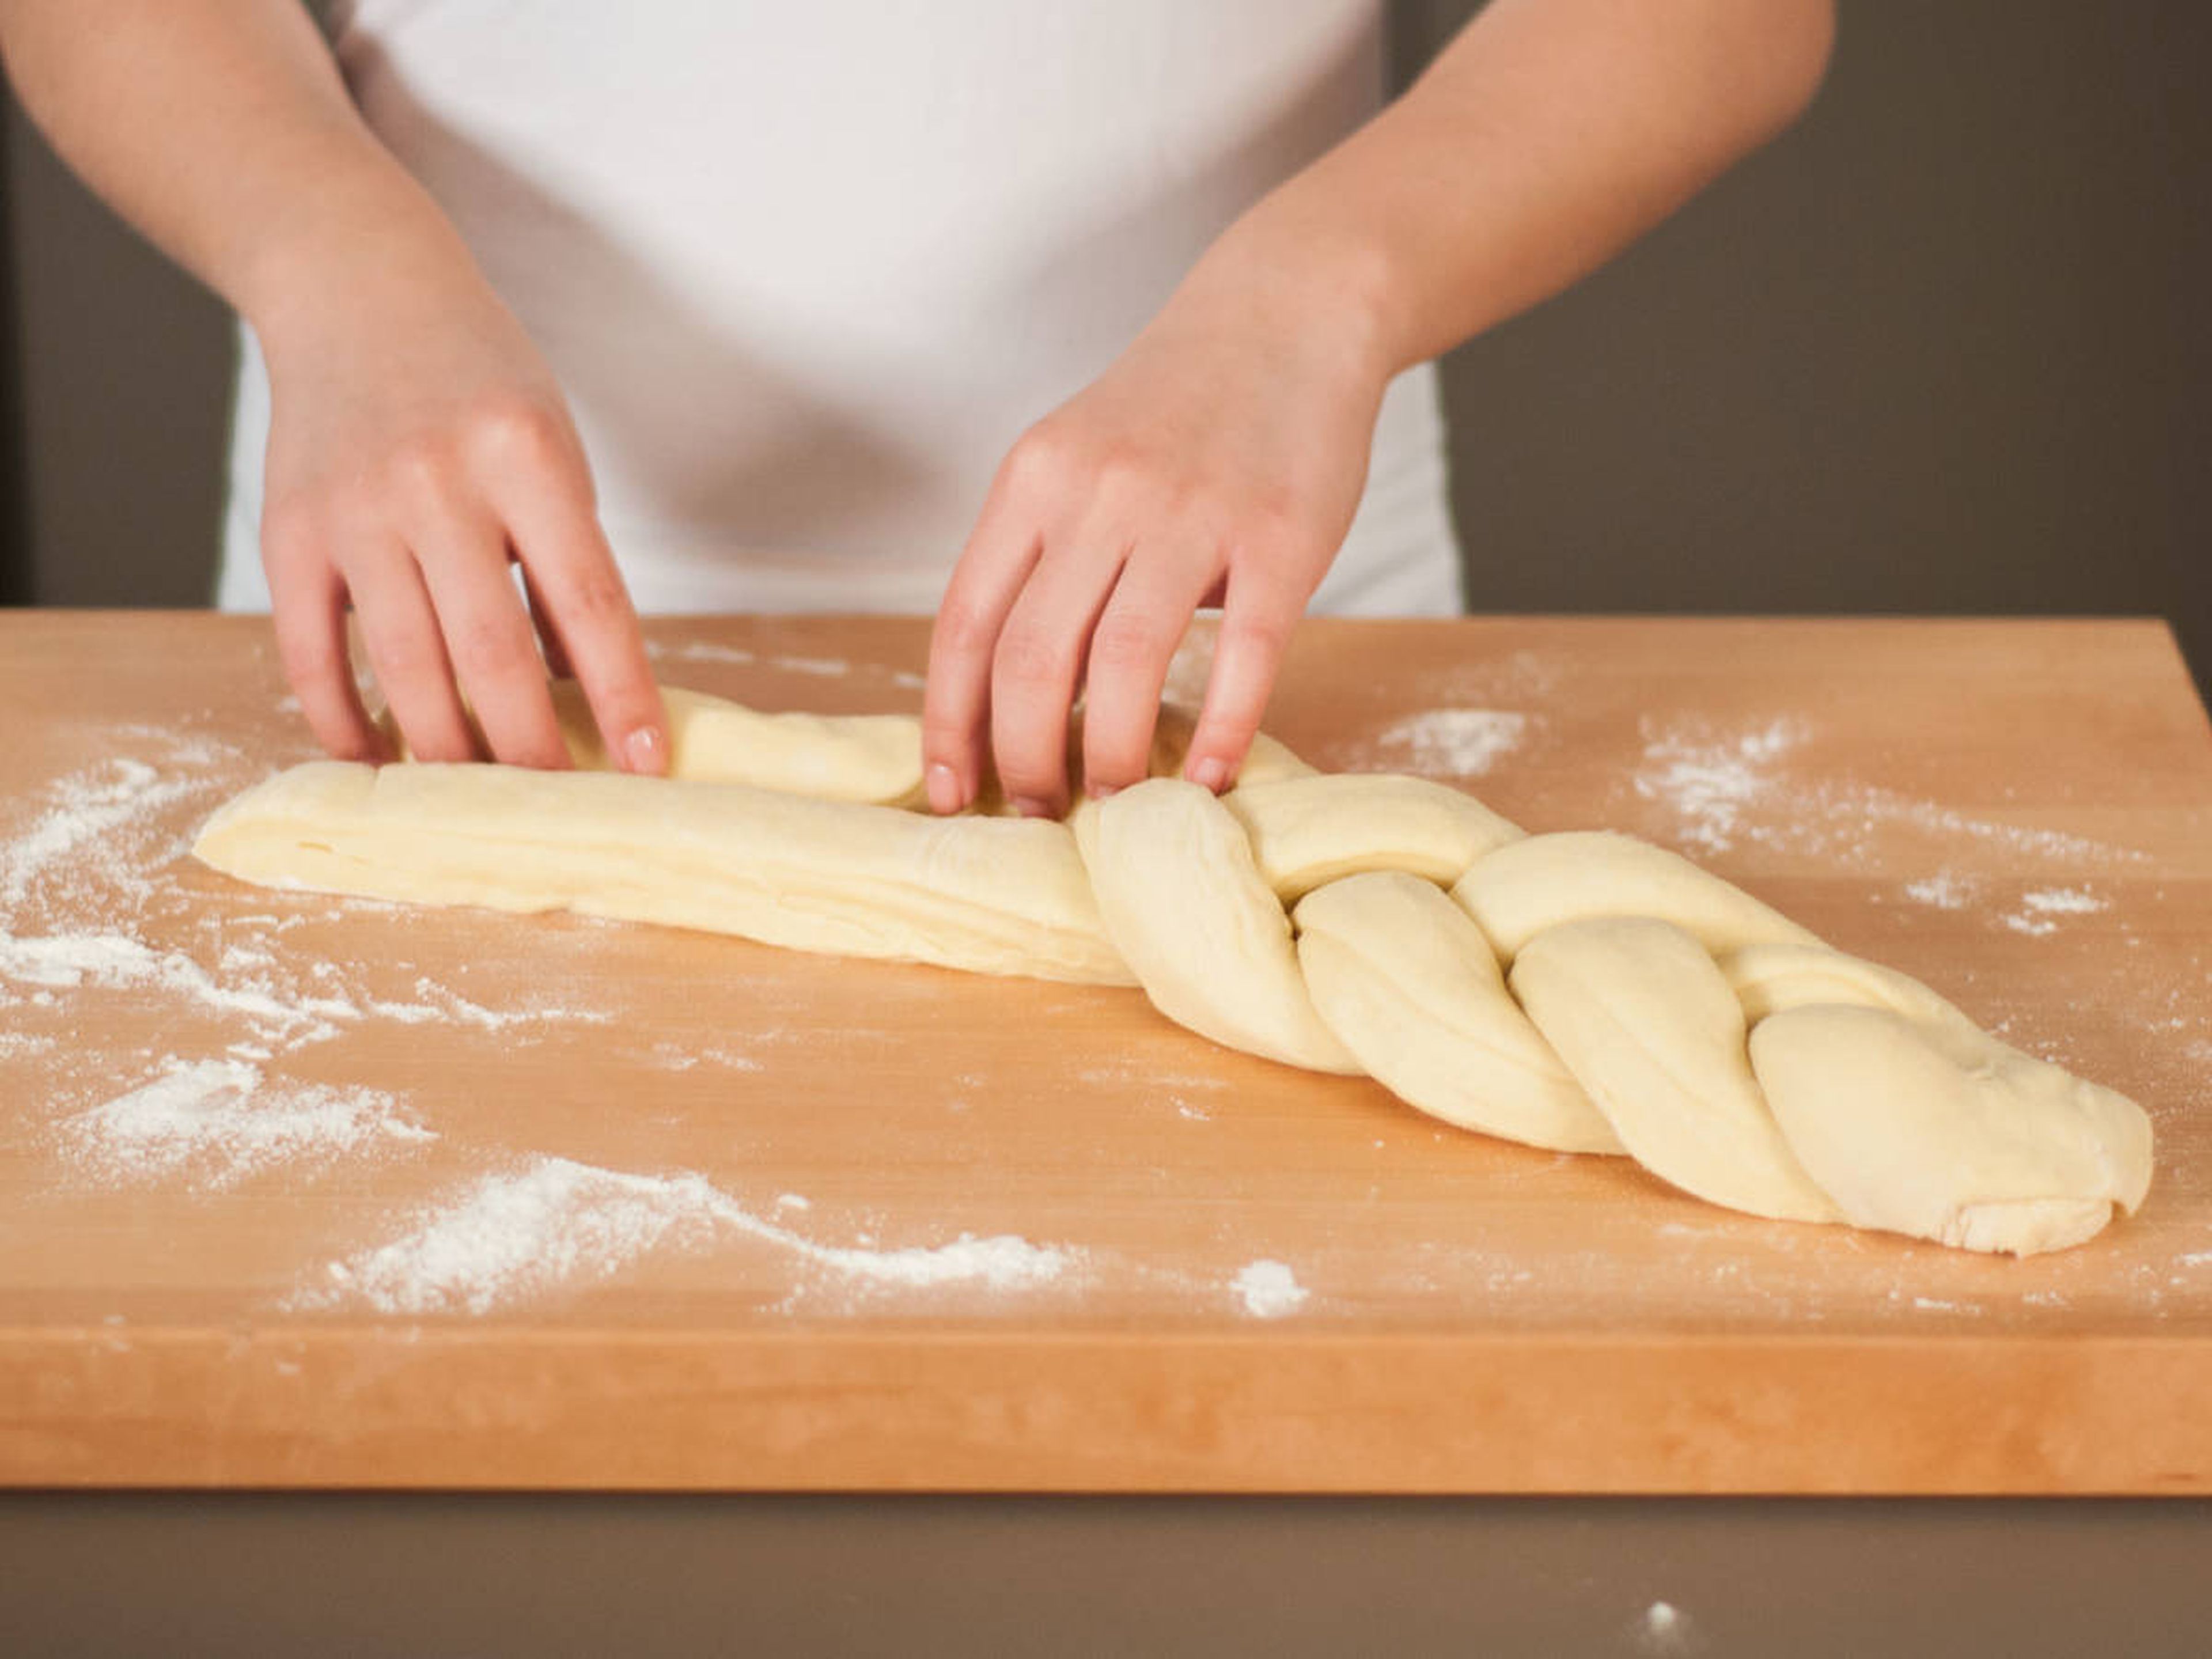 Beginning from the top, carefully braid dough into a loaf. Tightly seal loose ends.